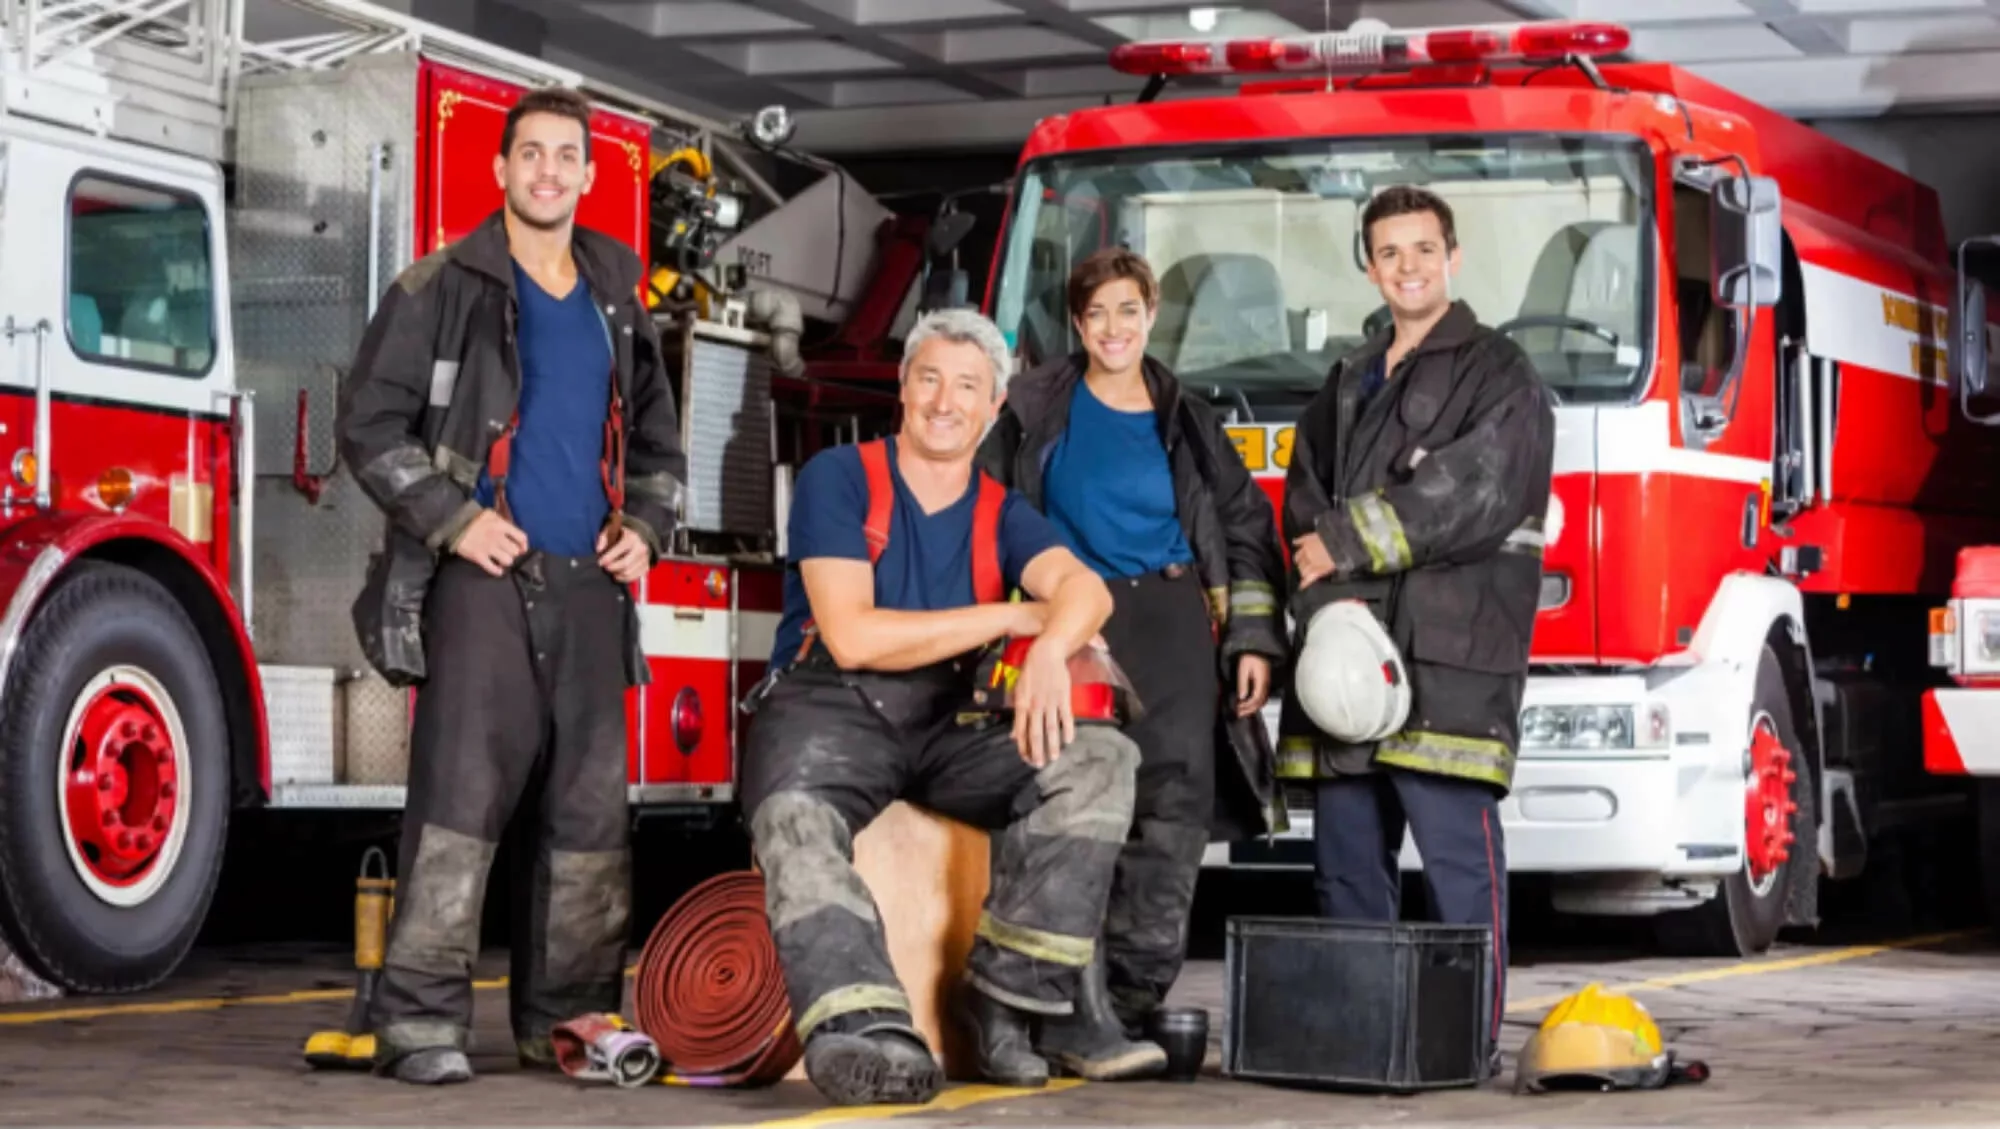 Four firefighters in uniform posing in front of a firetruck.